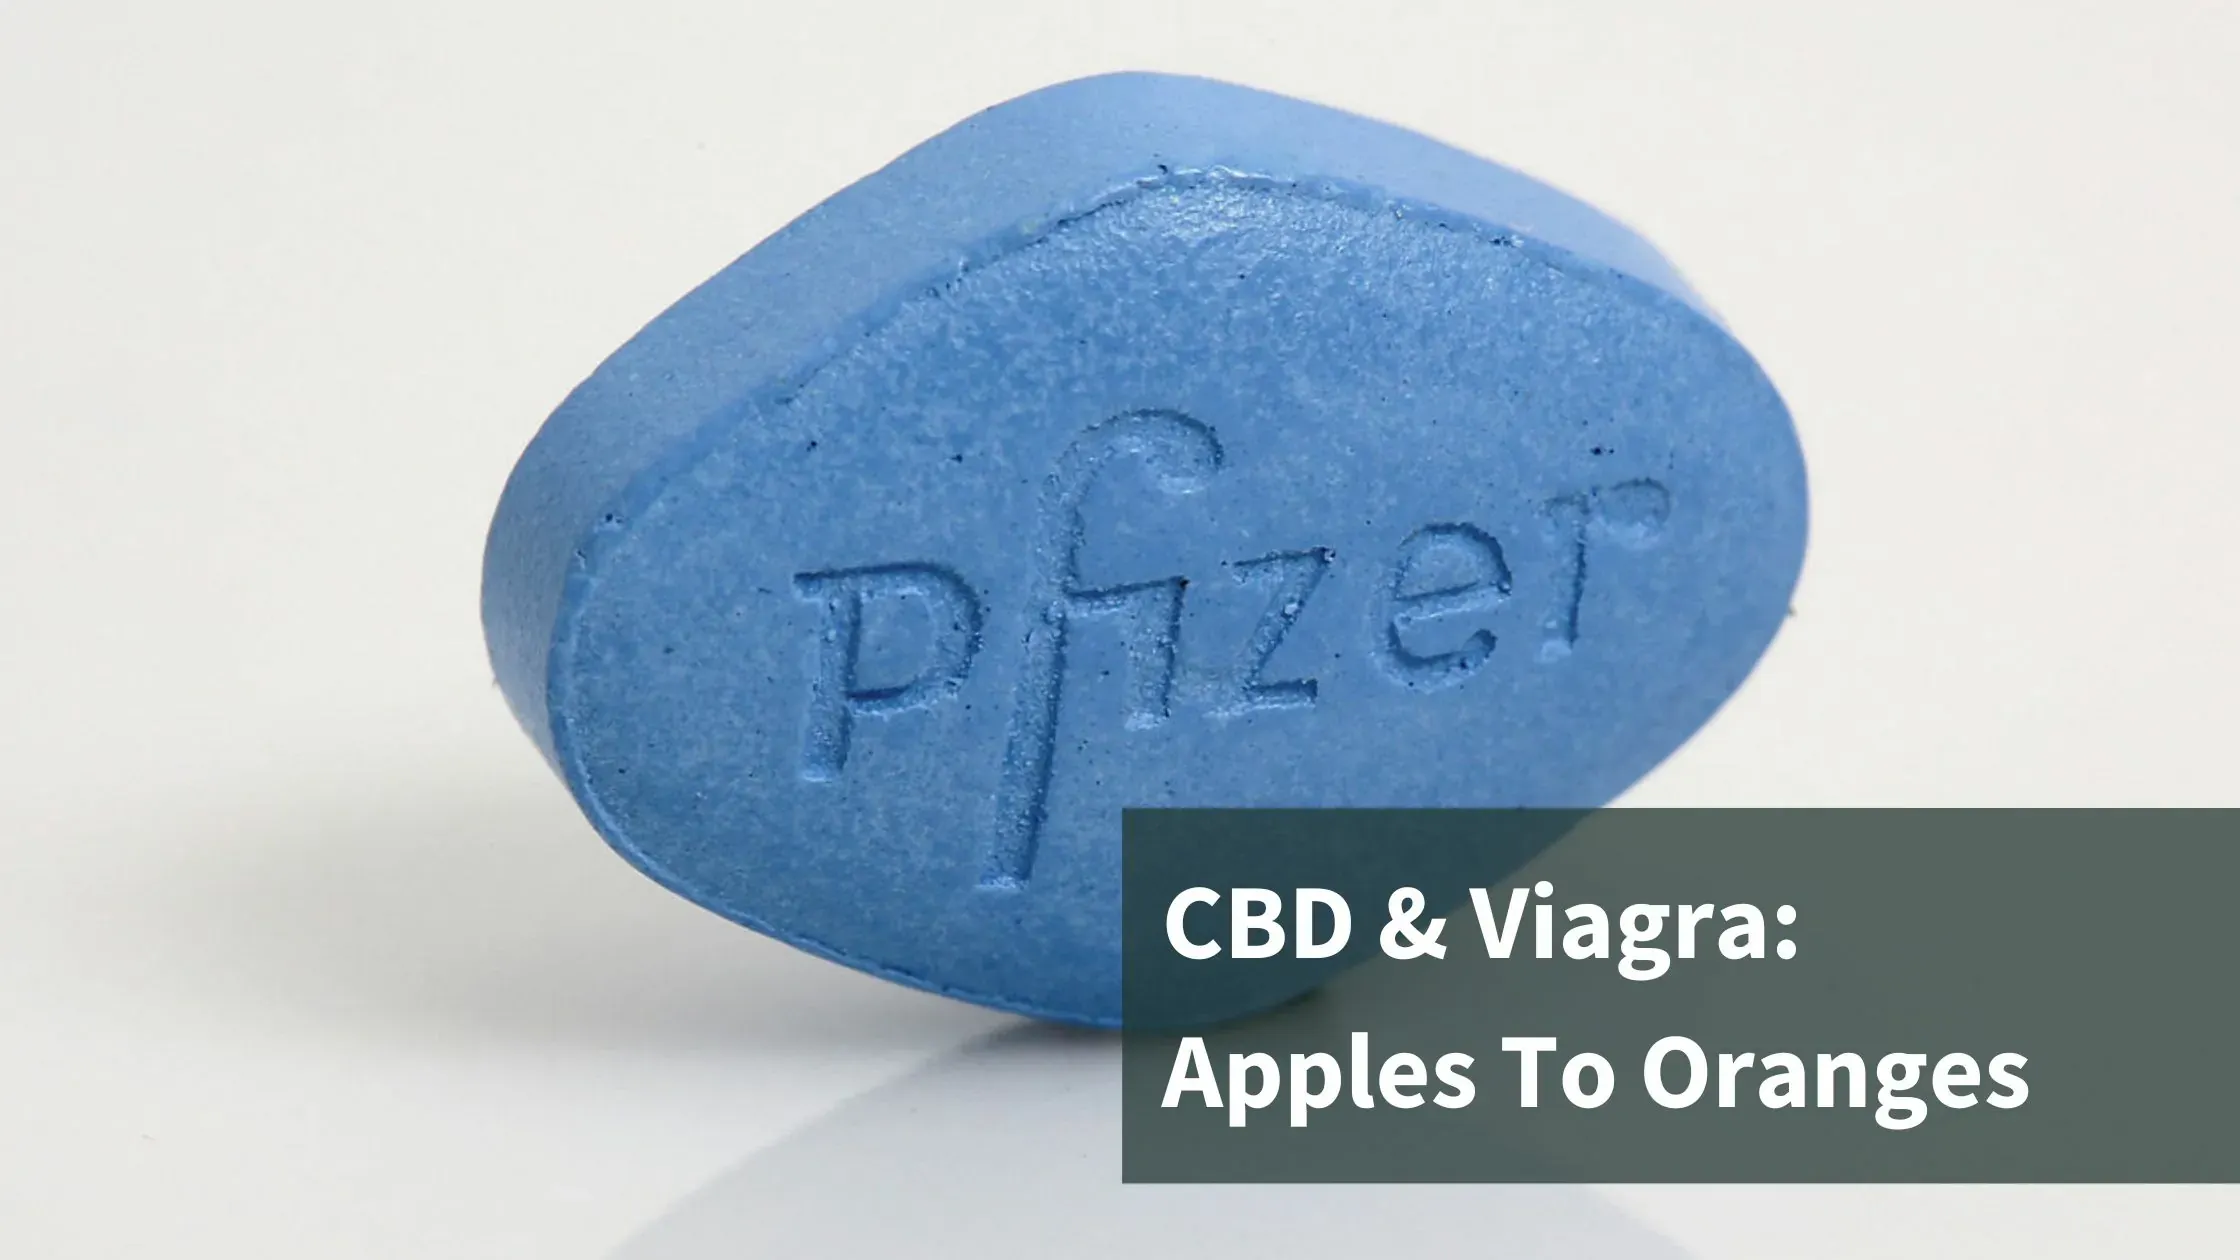 A tablet of Viagra with the words "CBD & Viagra: Apples to Oranges"